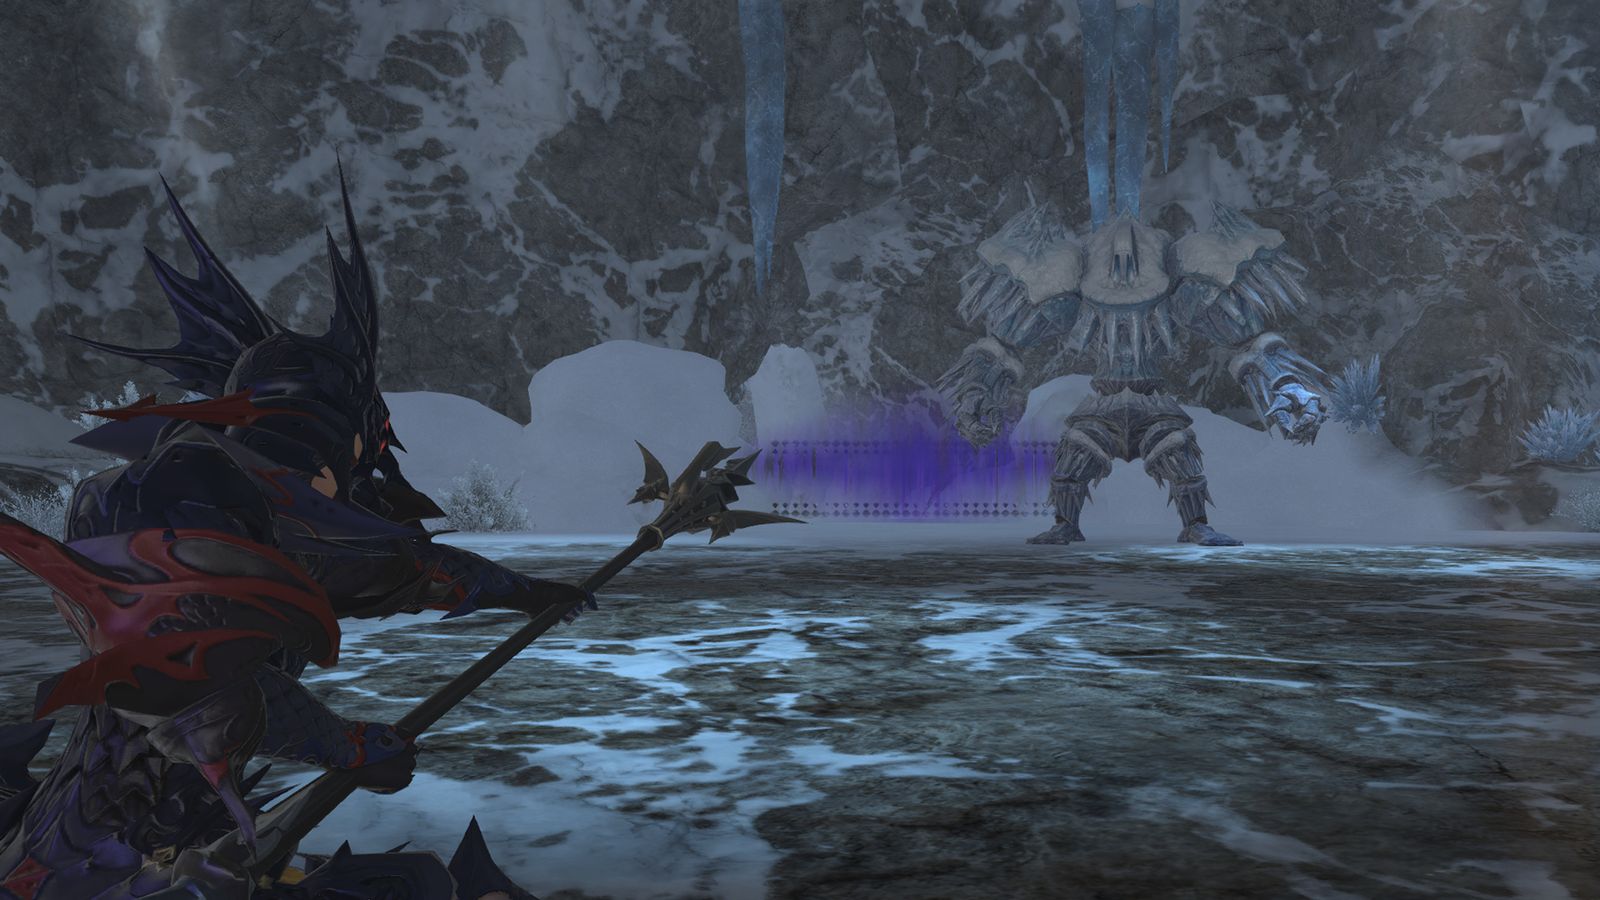 An image of a Dragoon from Final Fantasy XIV about to fight one of the bosses in the icy dungeon Snowcloak, one of the dungeons required for the Anima Weapon Heavensward relic weapon questline.